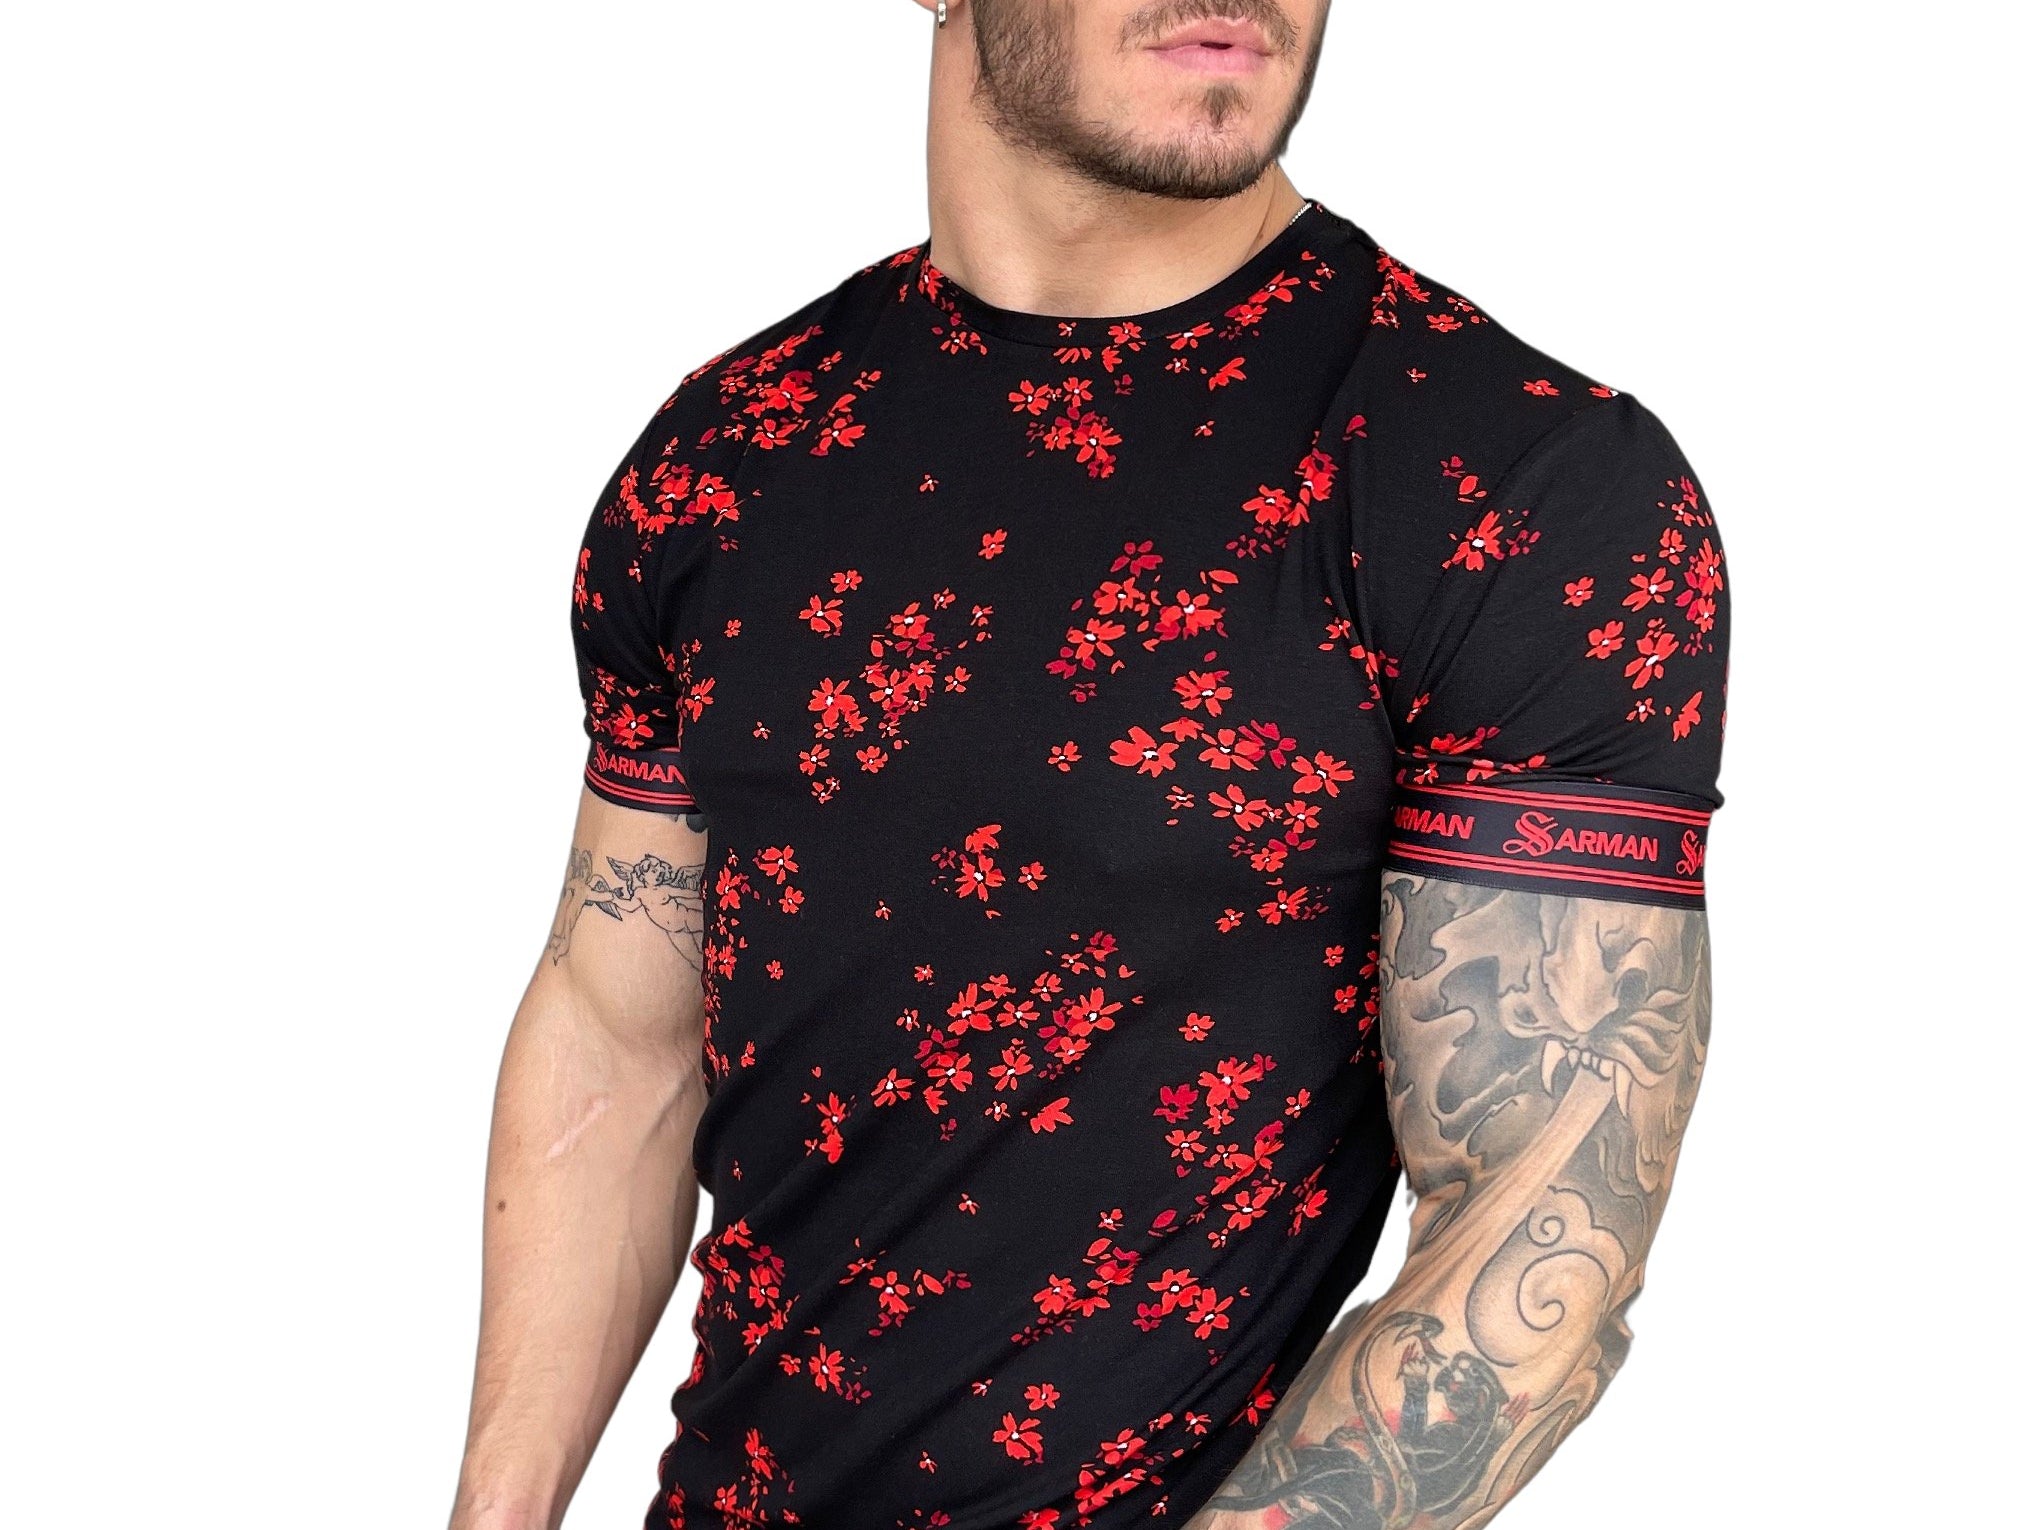 Anemone - Red T-shirt for Men - Sarman Fashion - Wholesale Clothing Fashion Brand for Men from Canada